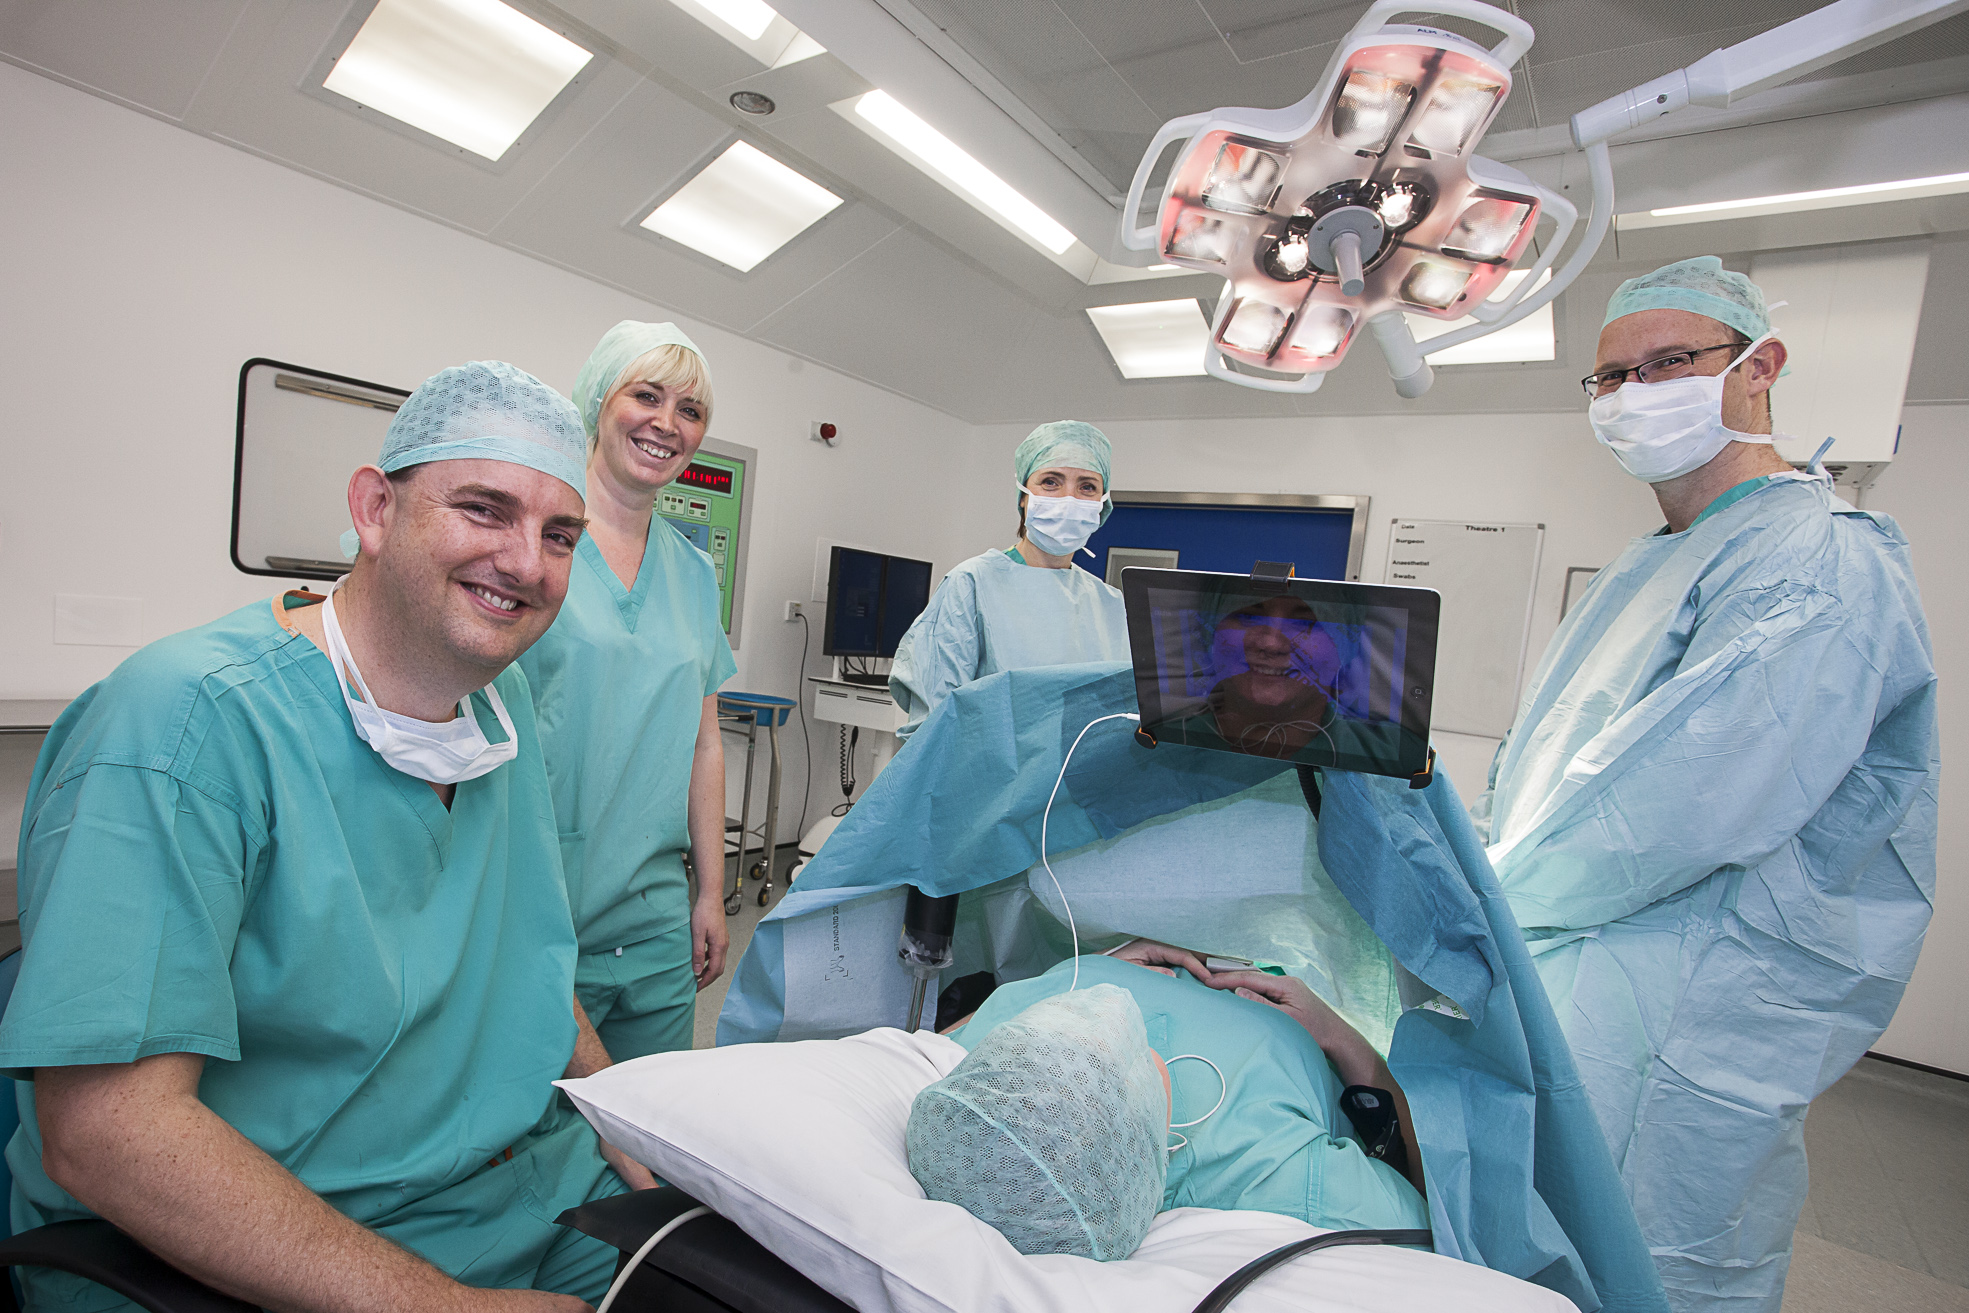 Patients use iPads to watch Poldark and Antiques Roadshow in operating theatre